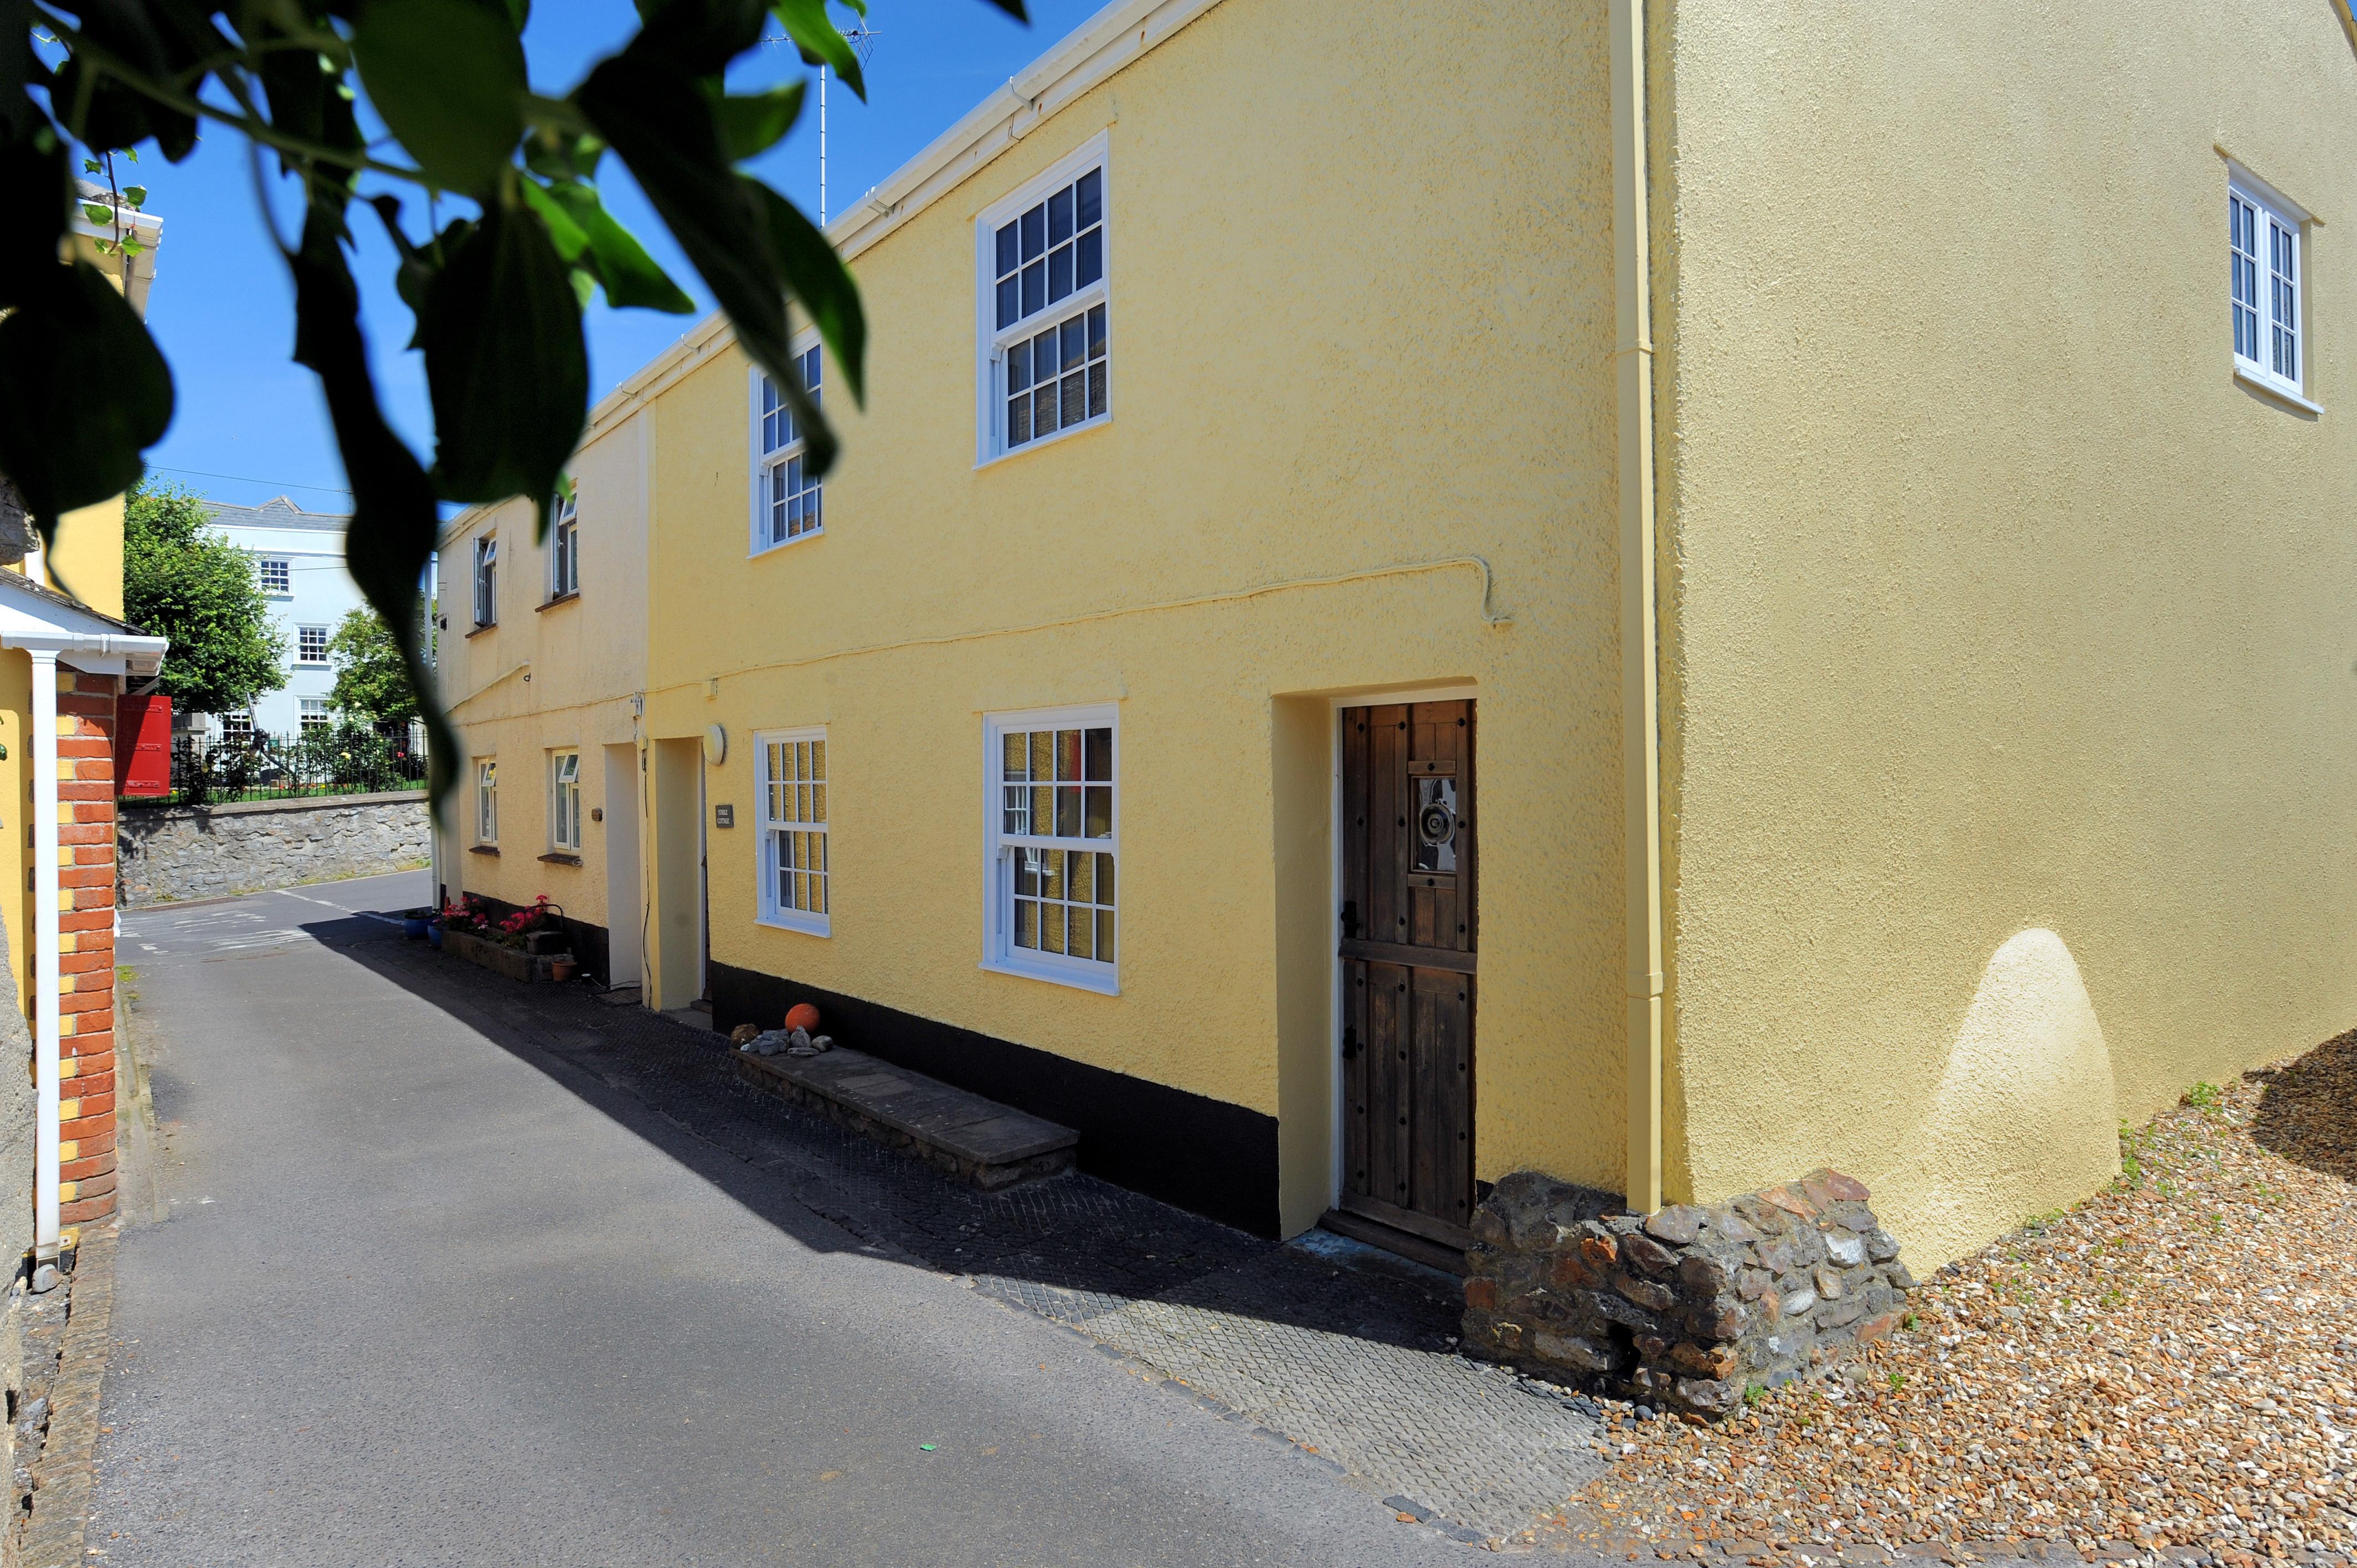 Holiday Cottage Reviews for 4/5 Georges Square - Self Catering Property in Lyme Regis, Dorset